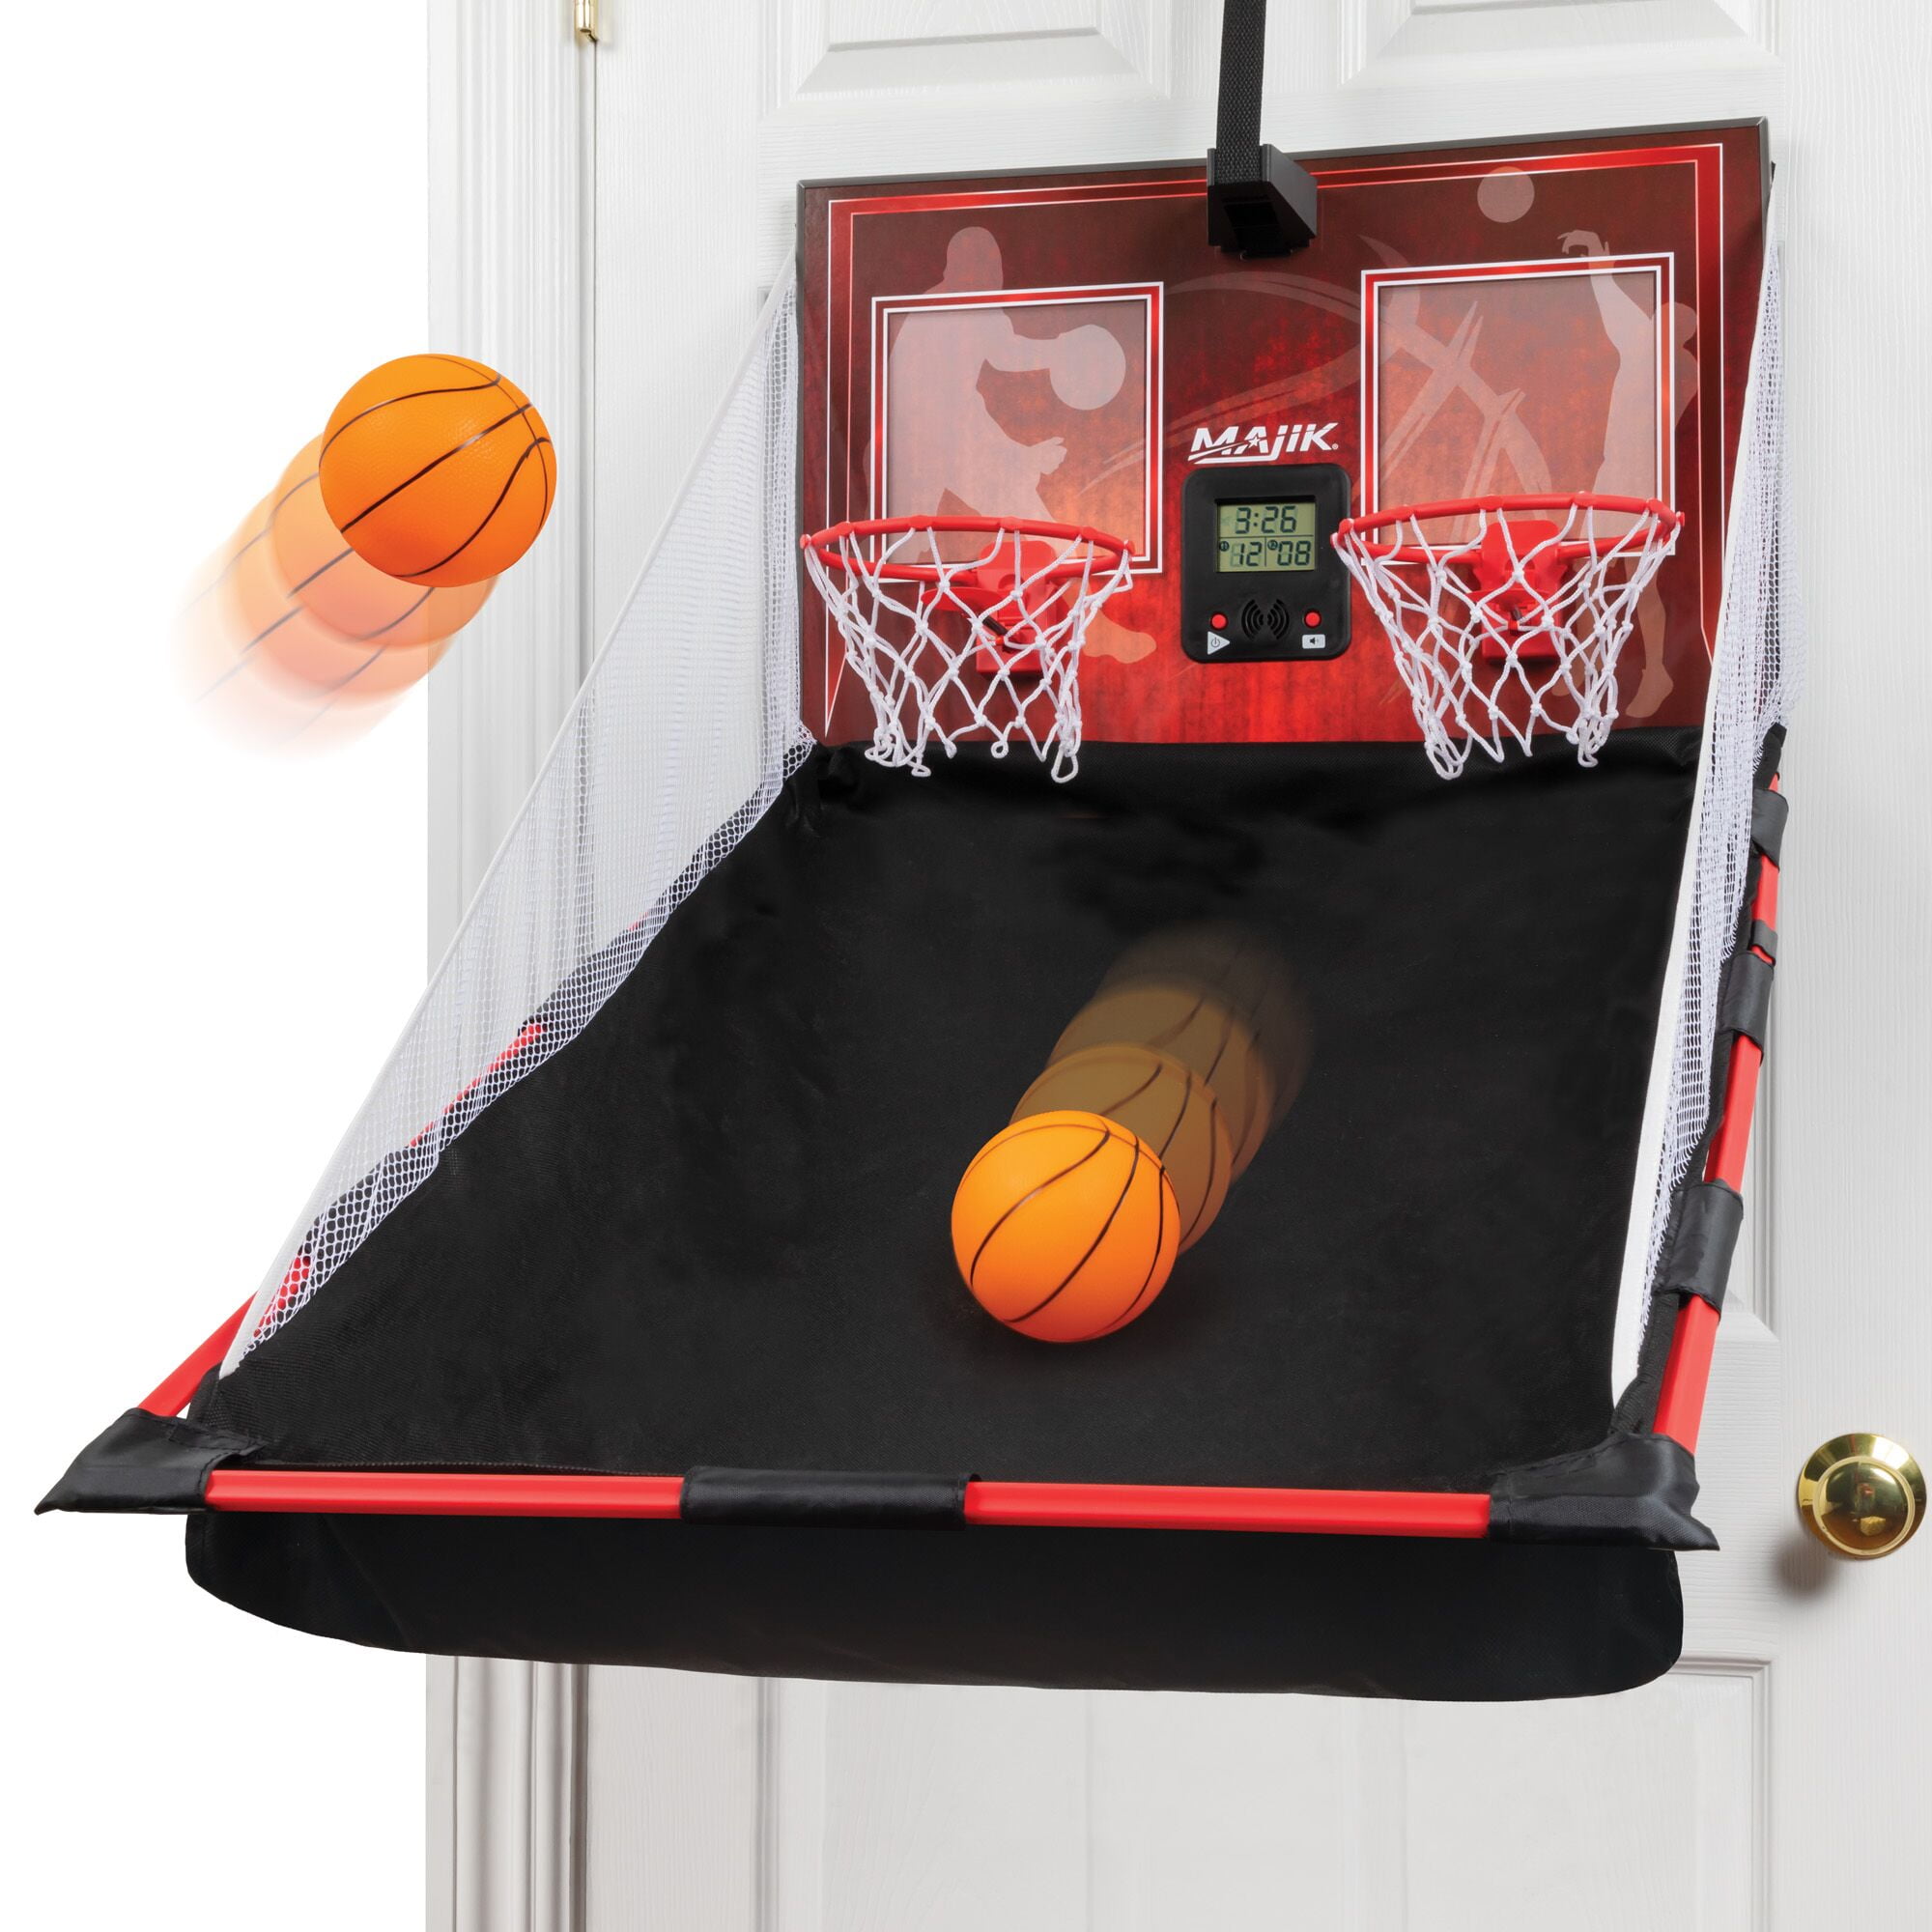 LED Scoring Majik Deluxe Over The Door Basketball Game Ball & Pump Included 